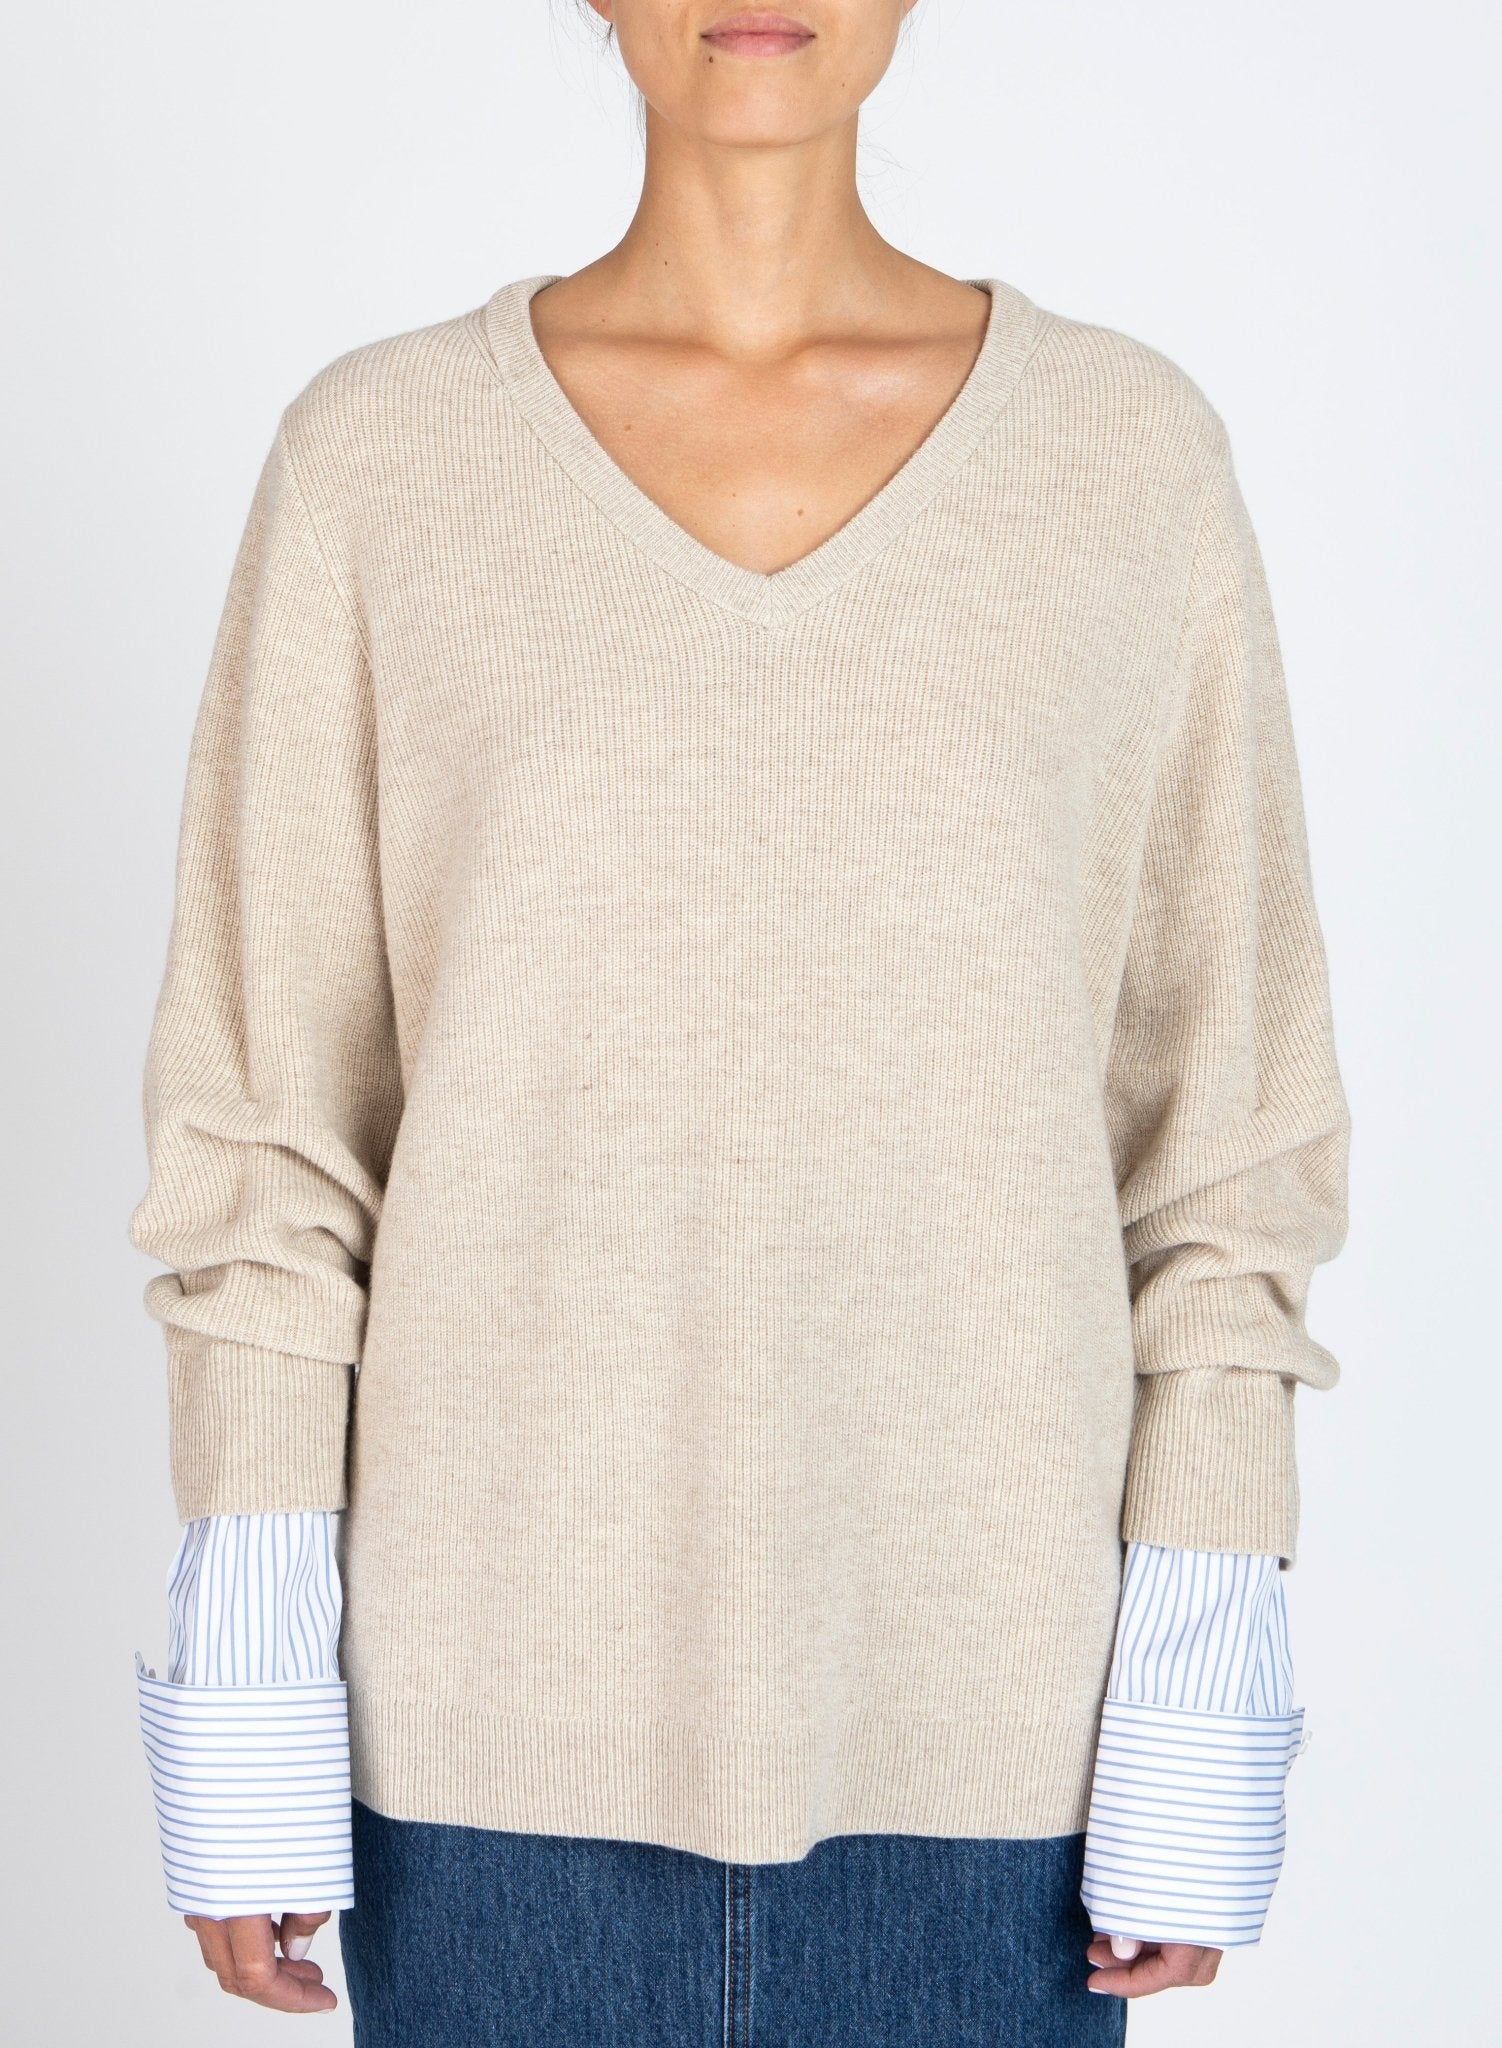 Cassie Mixed Media Sweater - Frock Shop